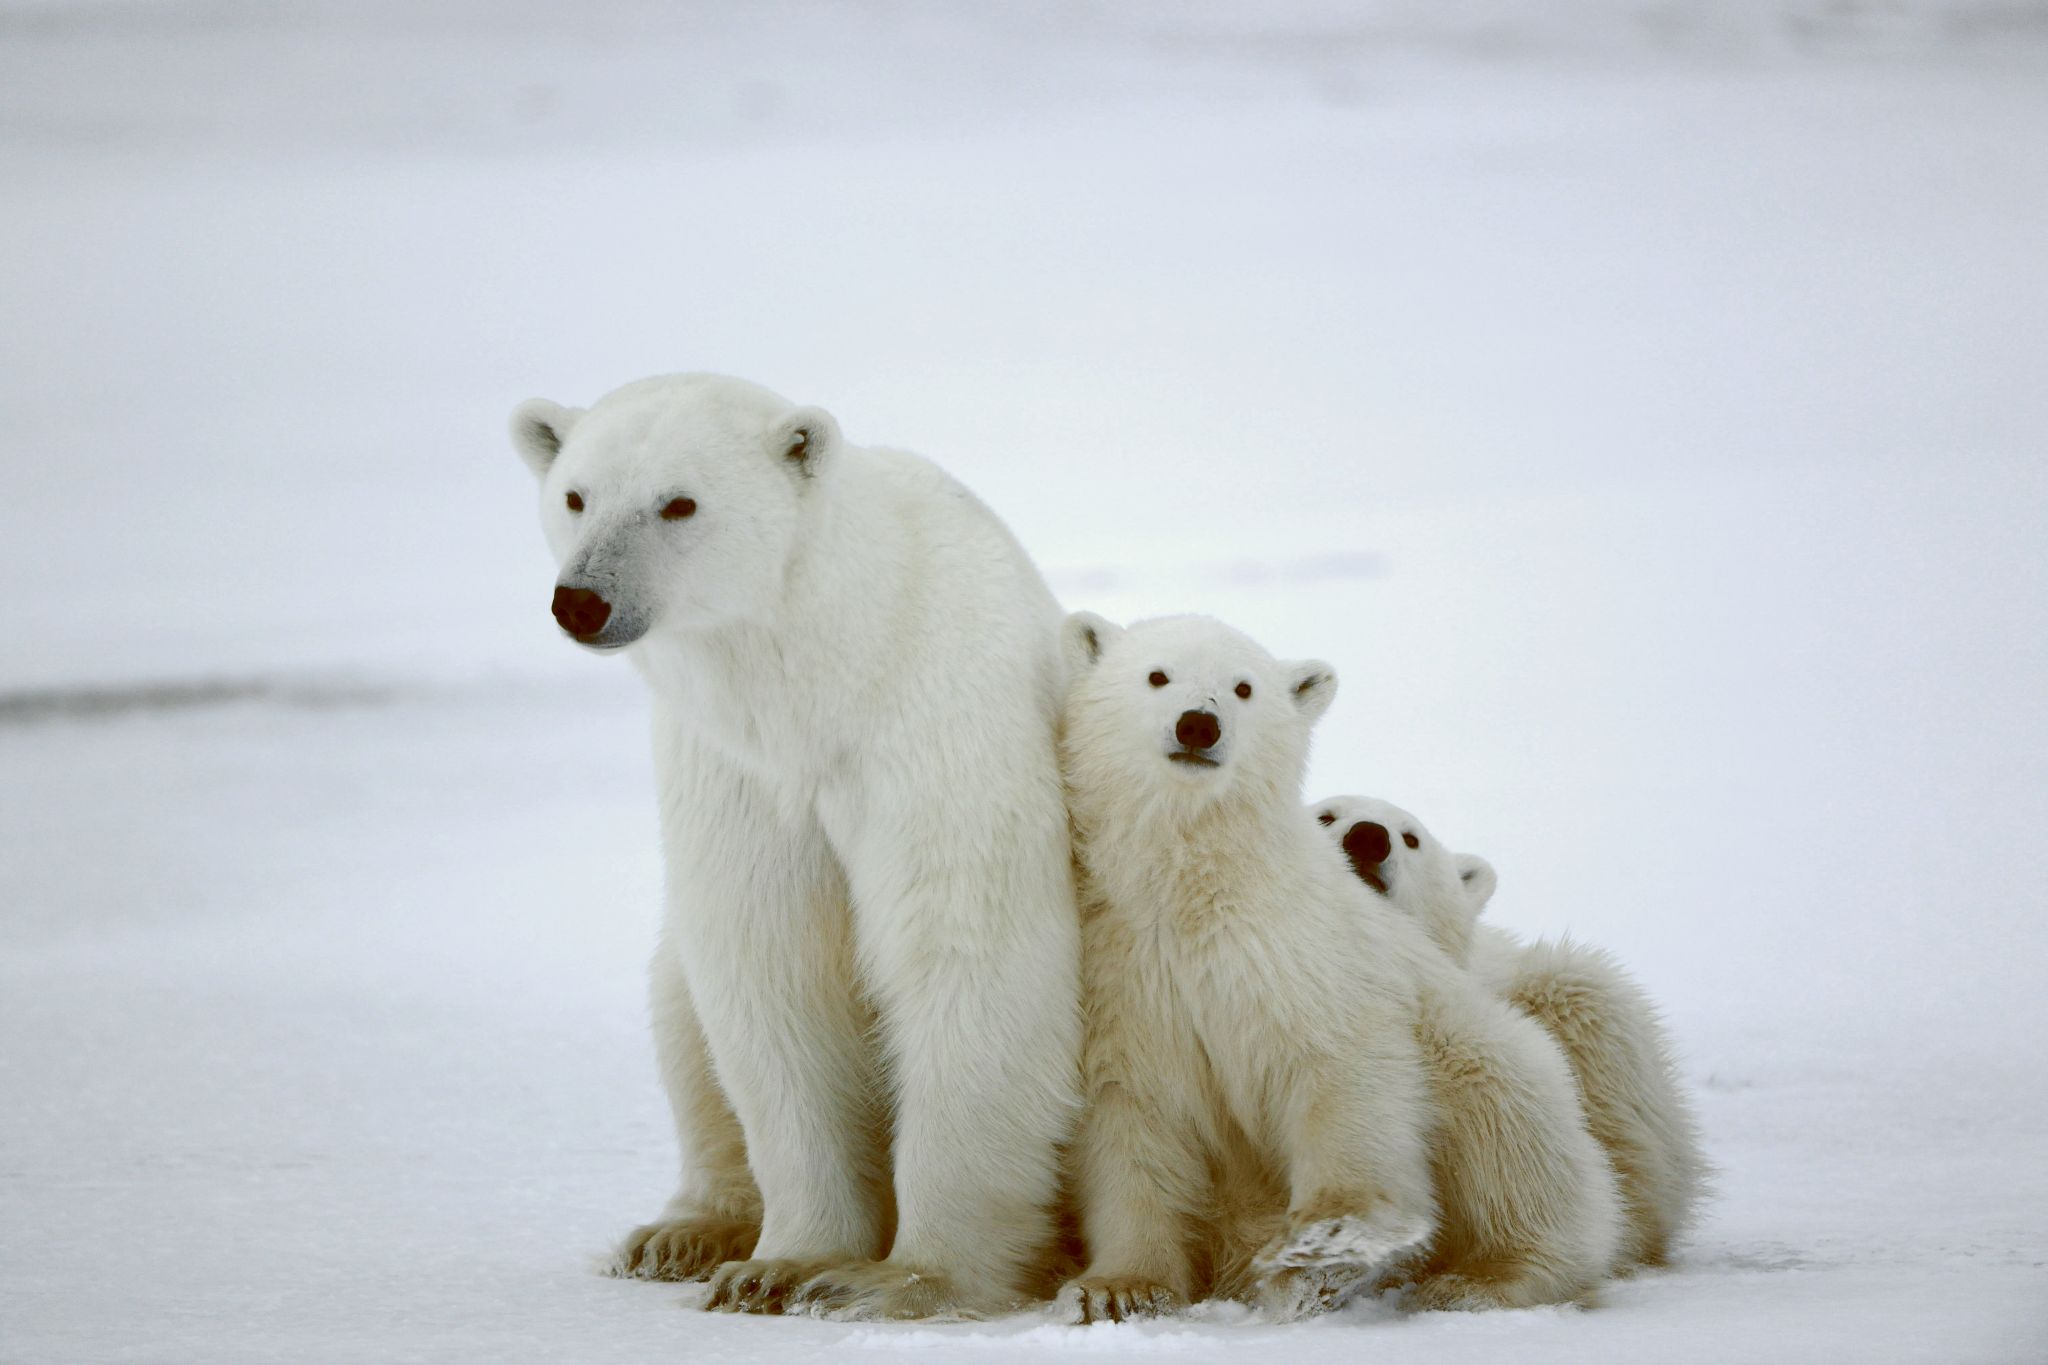 une famille d’ours blancs (ours polaires)